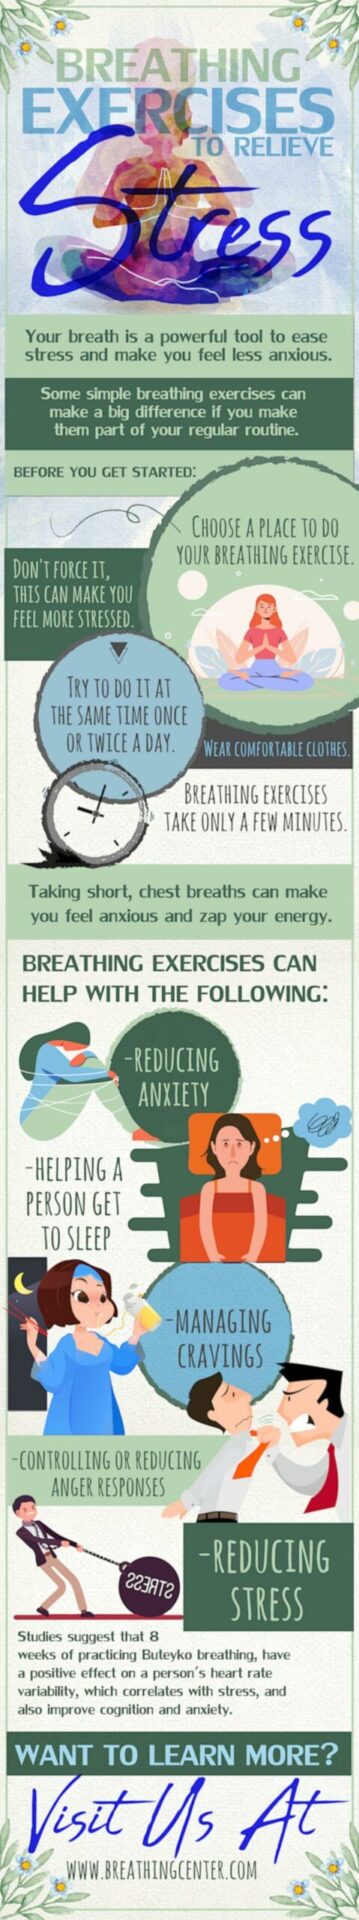 Breathing Exercises To Relieve Stress with Buteyko Method